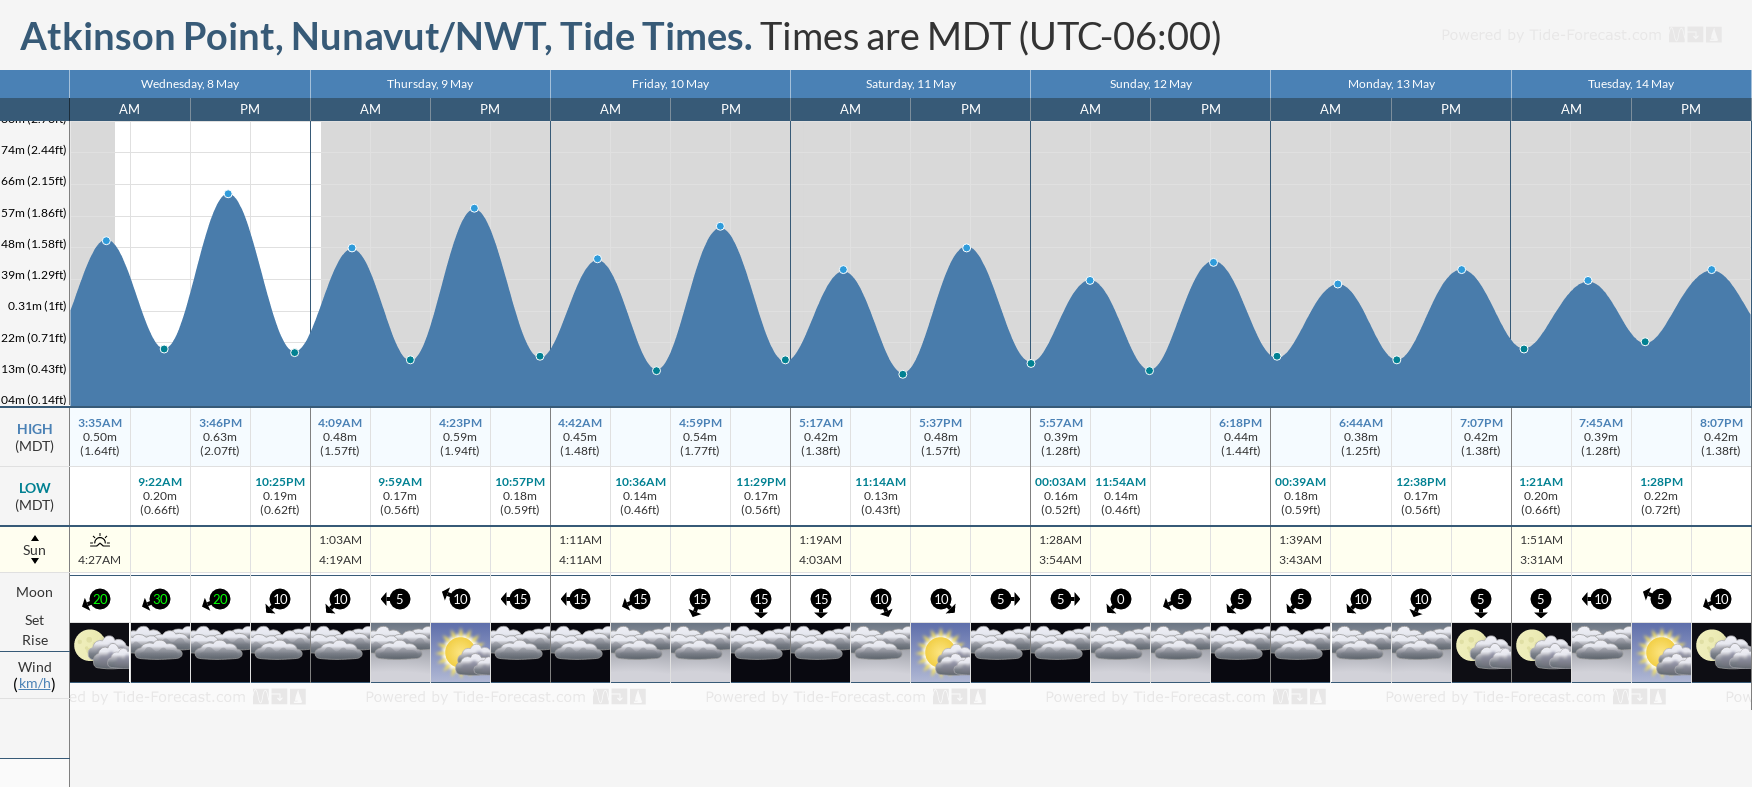 Atkinson Point, Nunavut/NWT Tide Chart including high and low tide tide times for the next 7 days